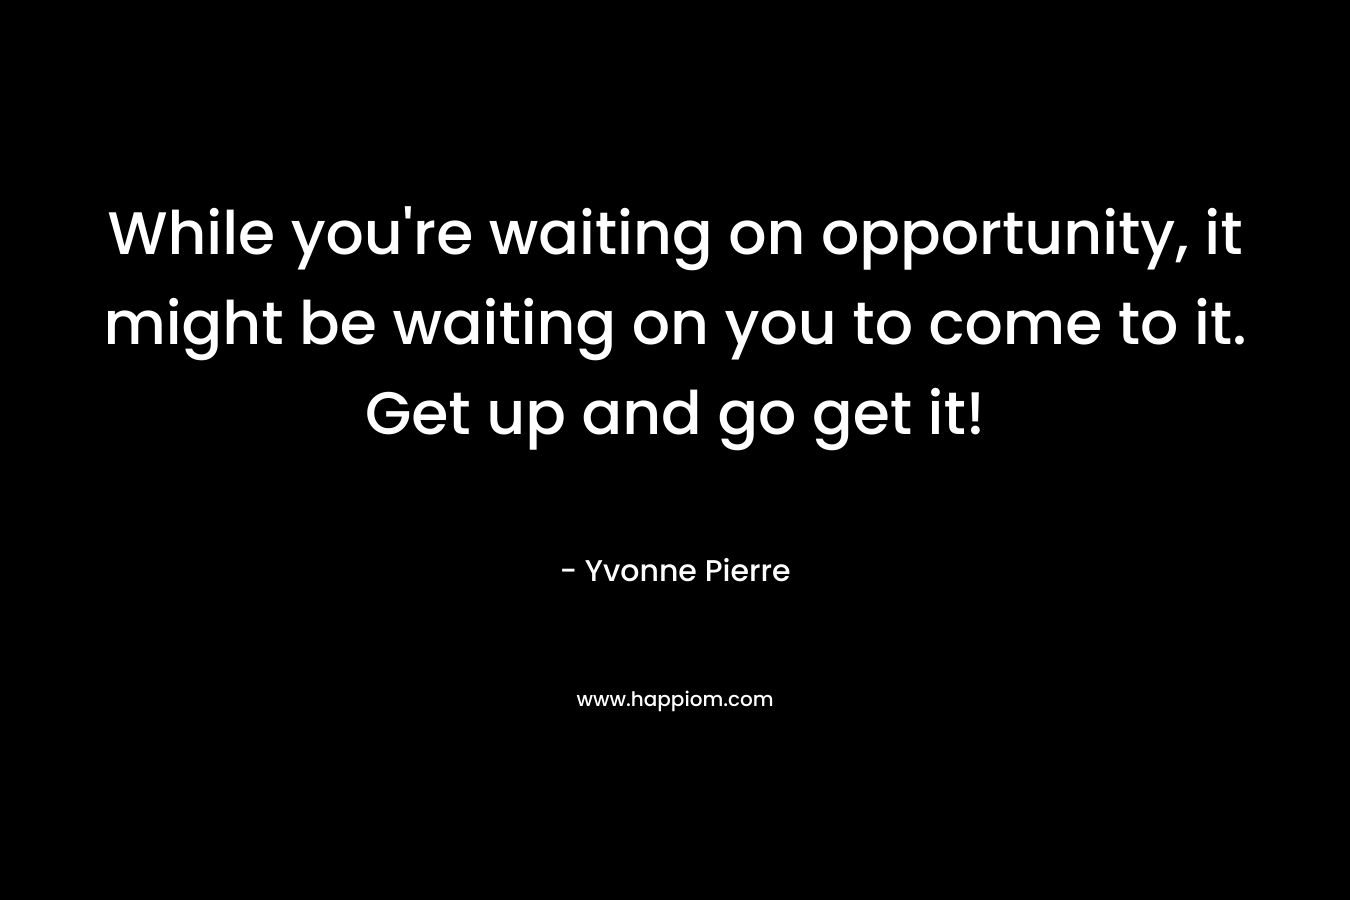 While you're waiting on opportunity, it might be waiting on you to come to it. Get up and go get it!